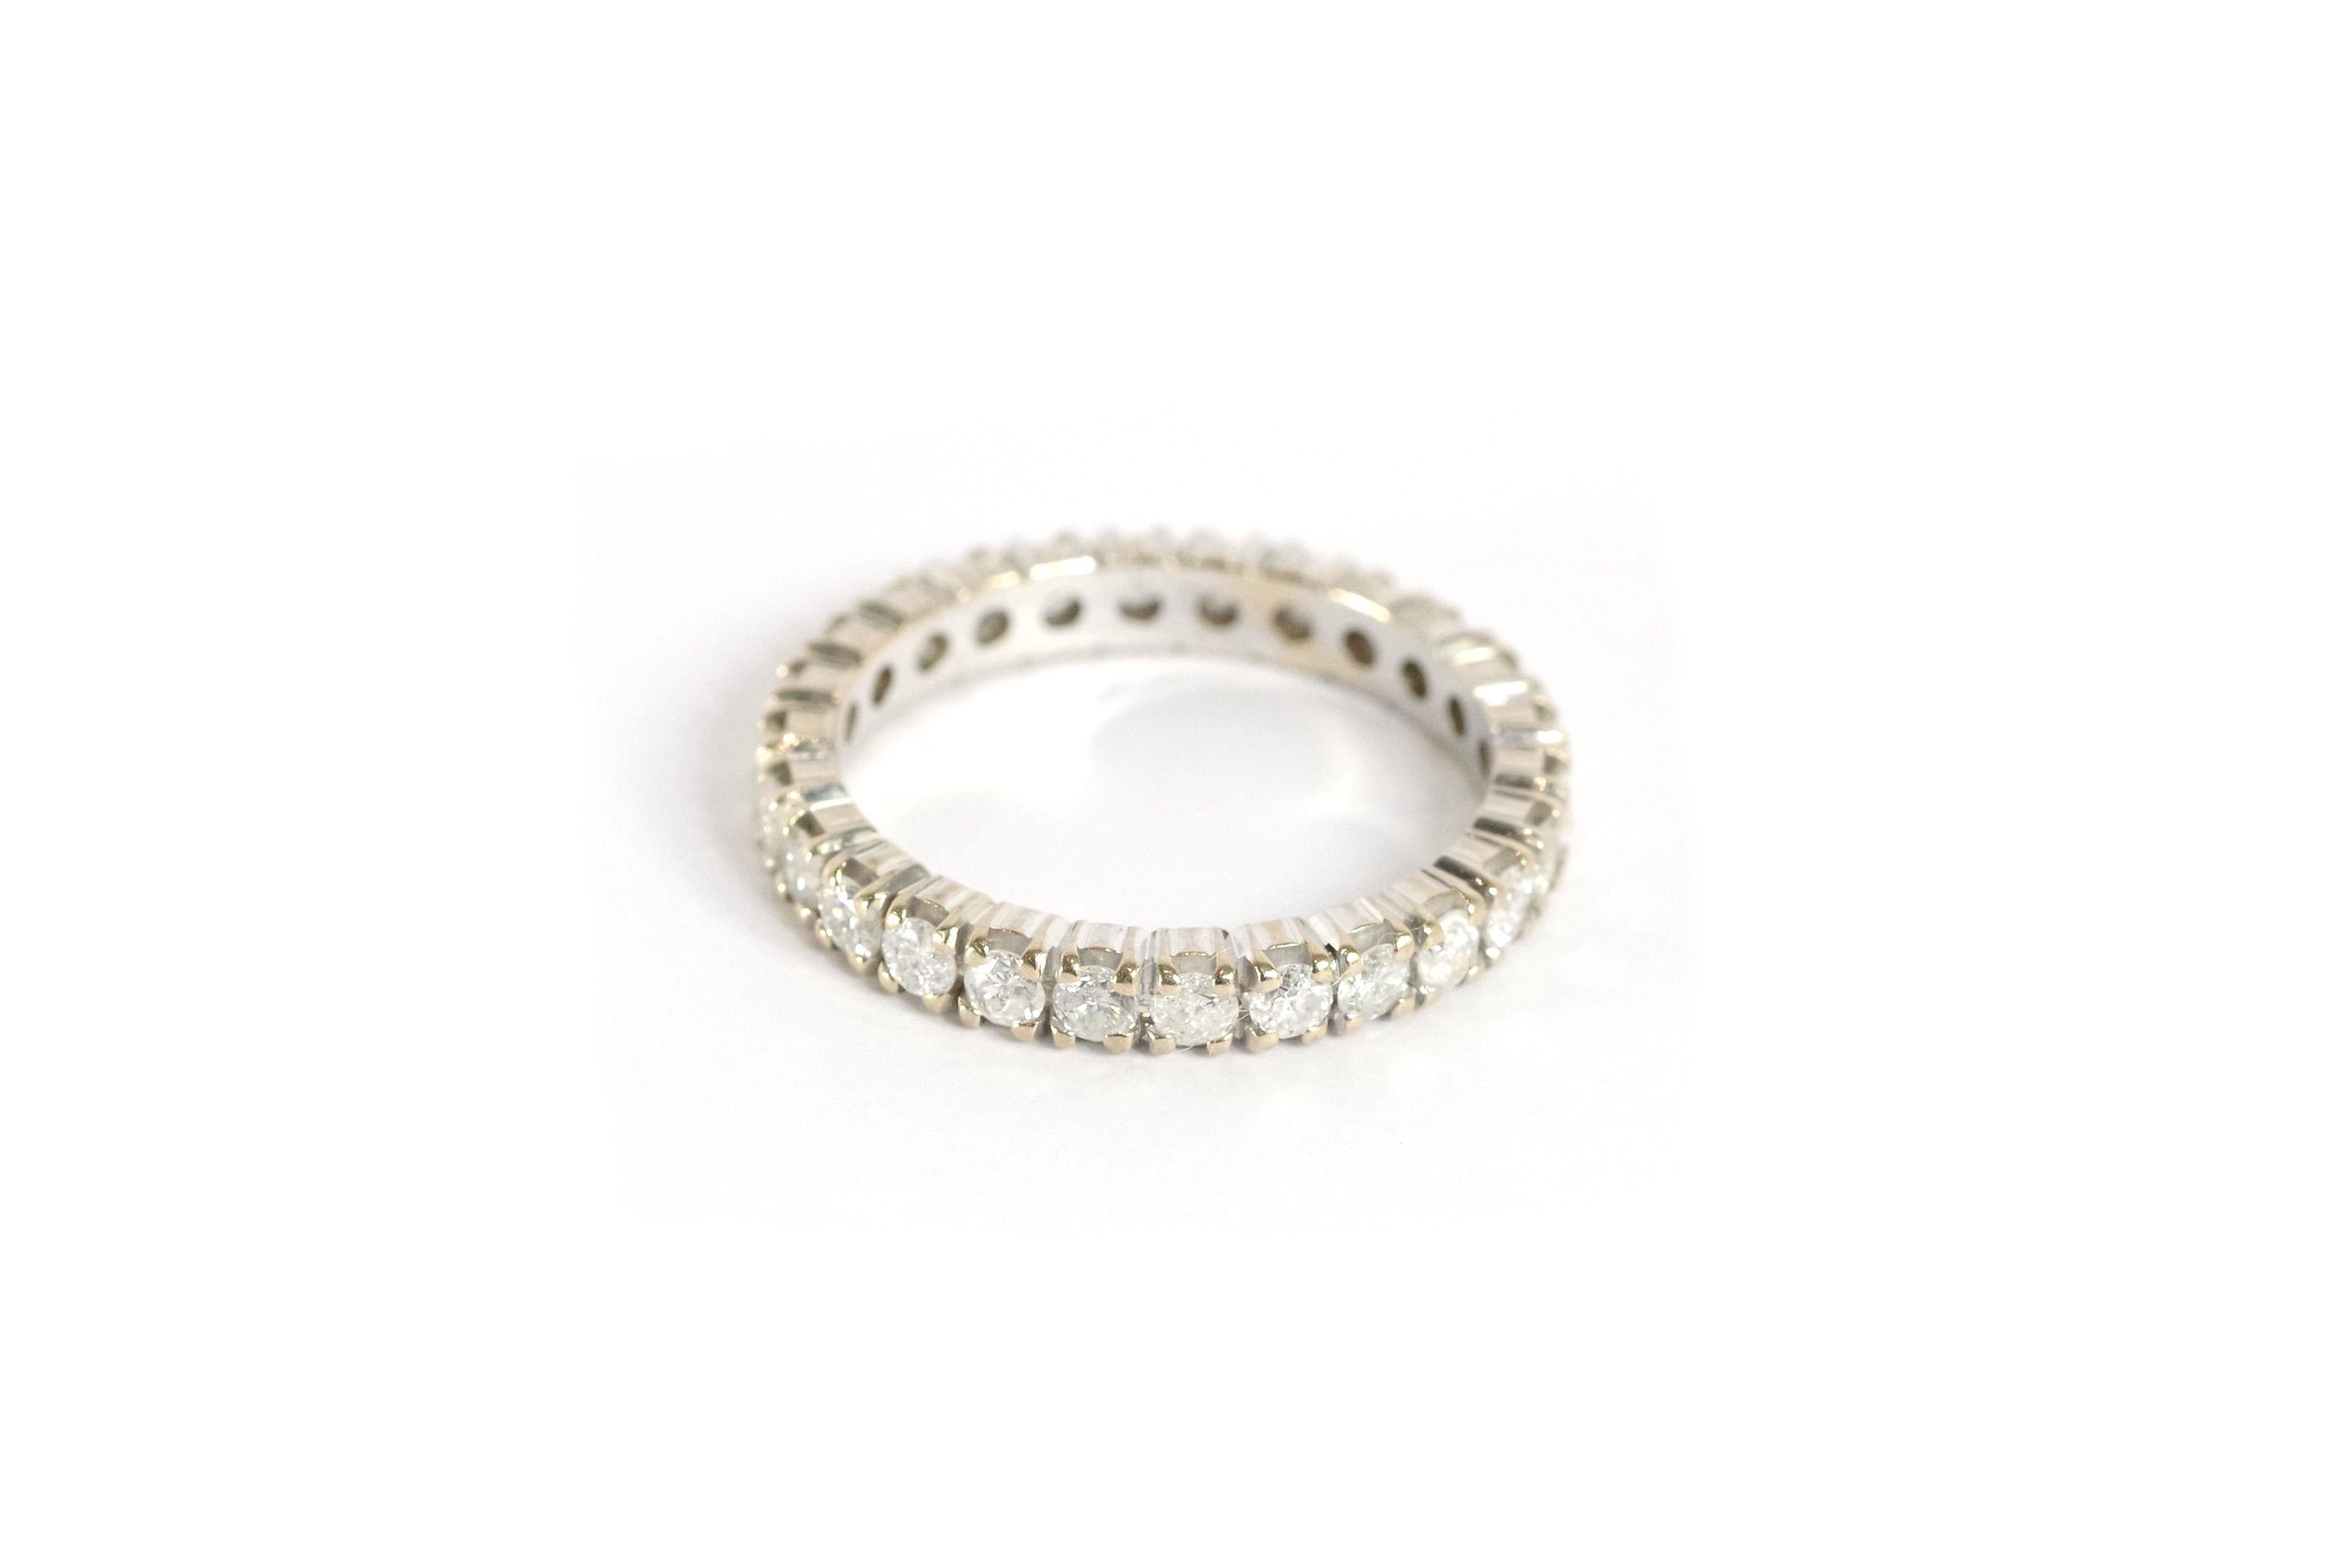 Eternity diamond ring in 18 karat white gold. Band set with 26 brilliant-cut diamonds. Vintage wedding band, eternity ring from the mid-20th century. 

Finger size: 52 EU or 5.75 US (no sizing possible).

Eagle head hallmark and illegible